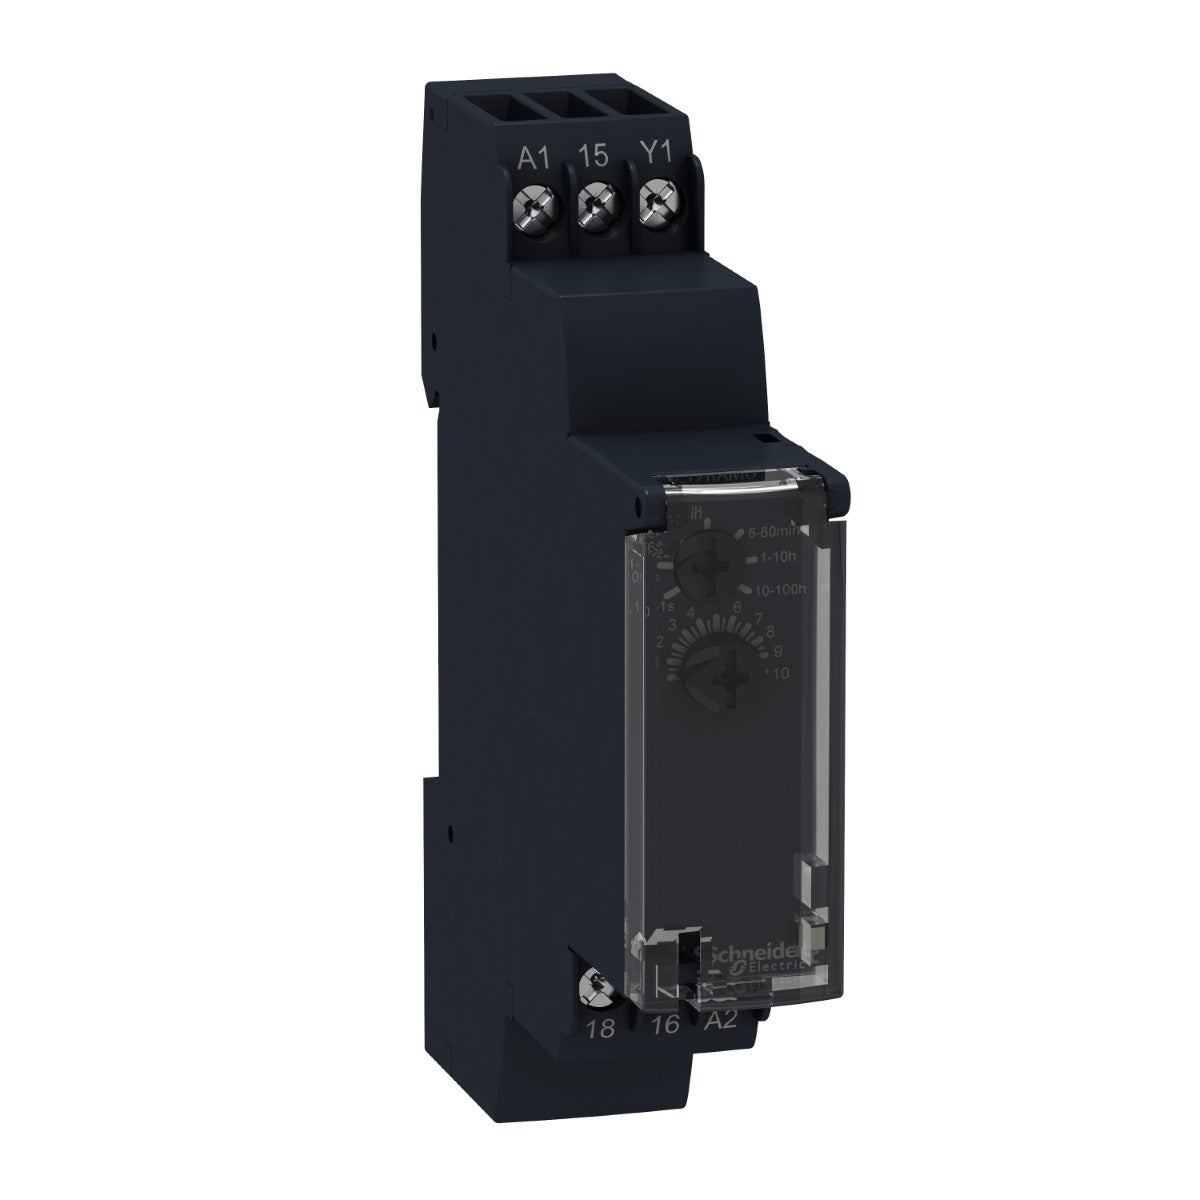 Modular timing relay, Harmony, 0.7A, 1s..100h, off delay, solid state output, 24...240V AC